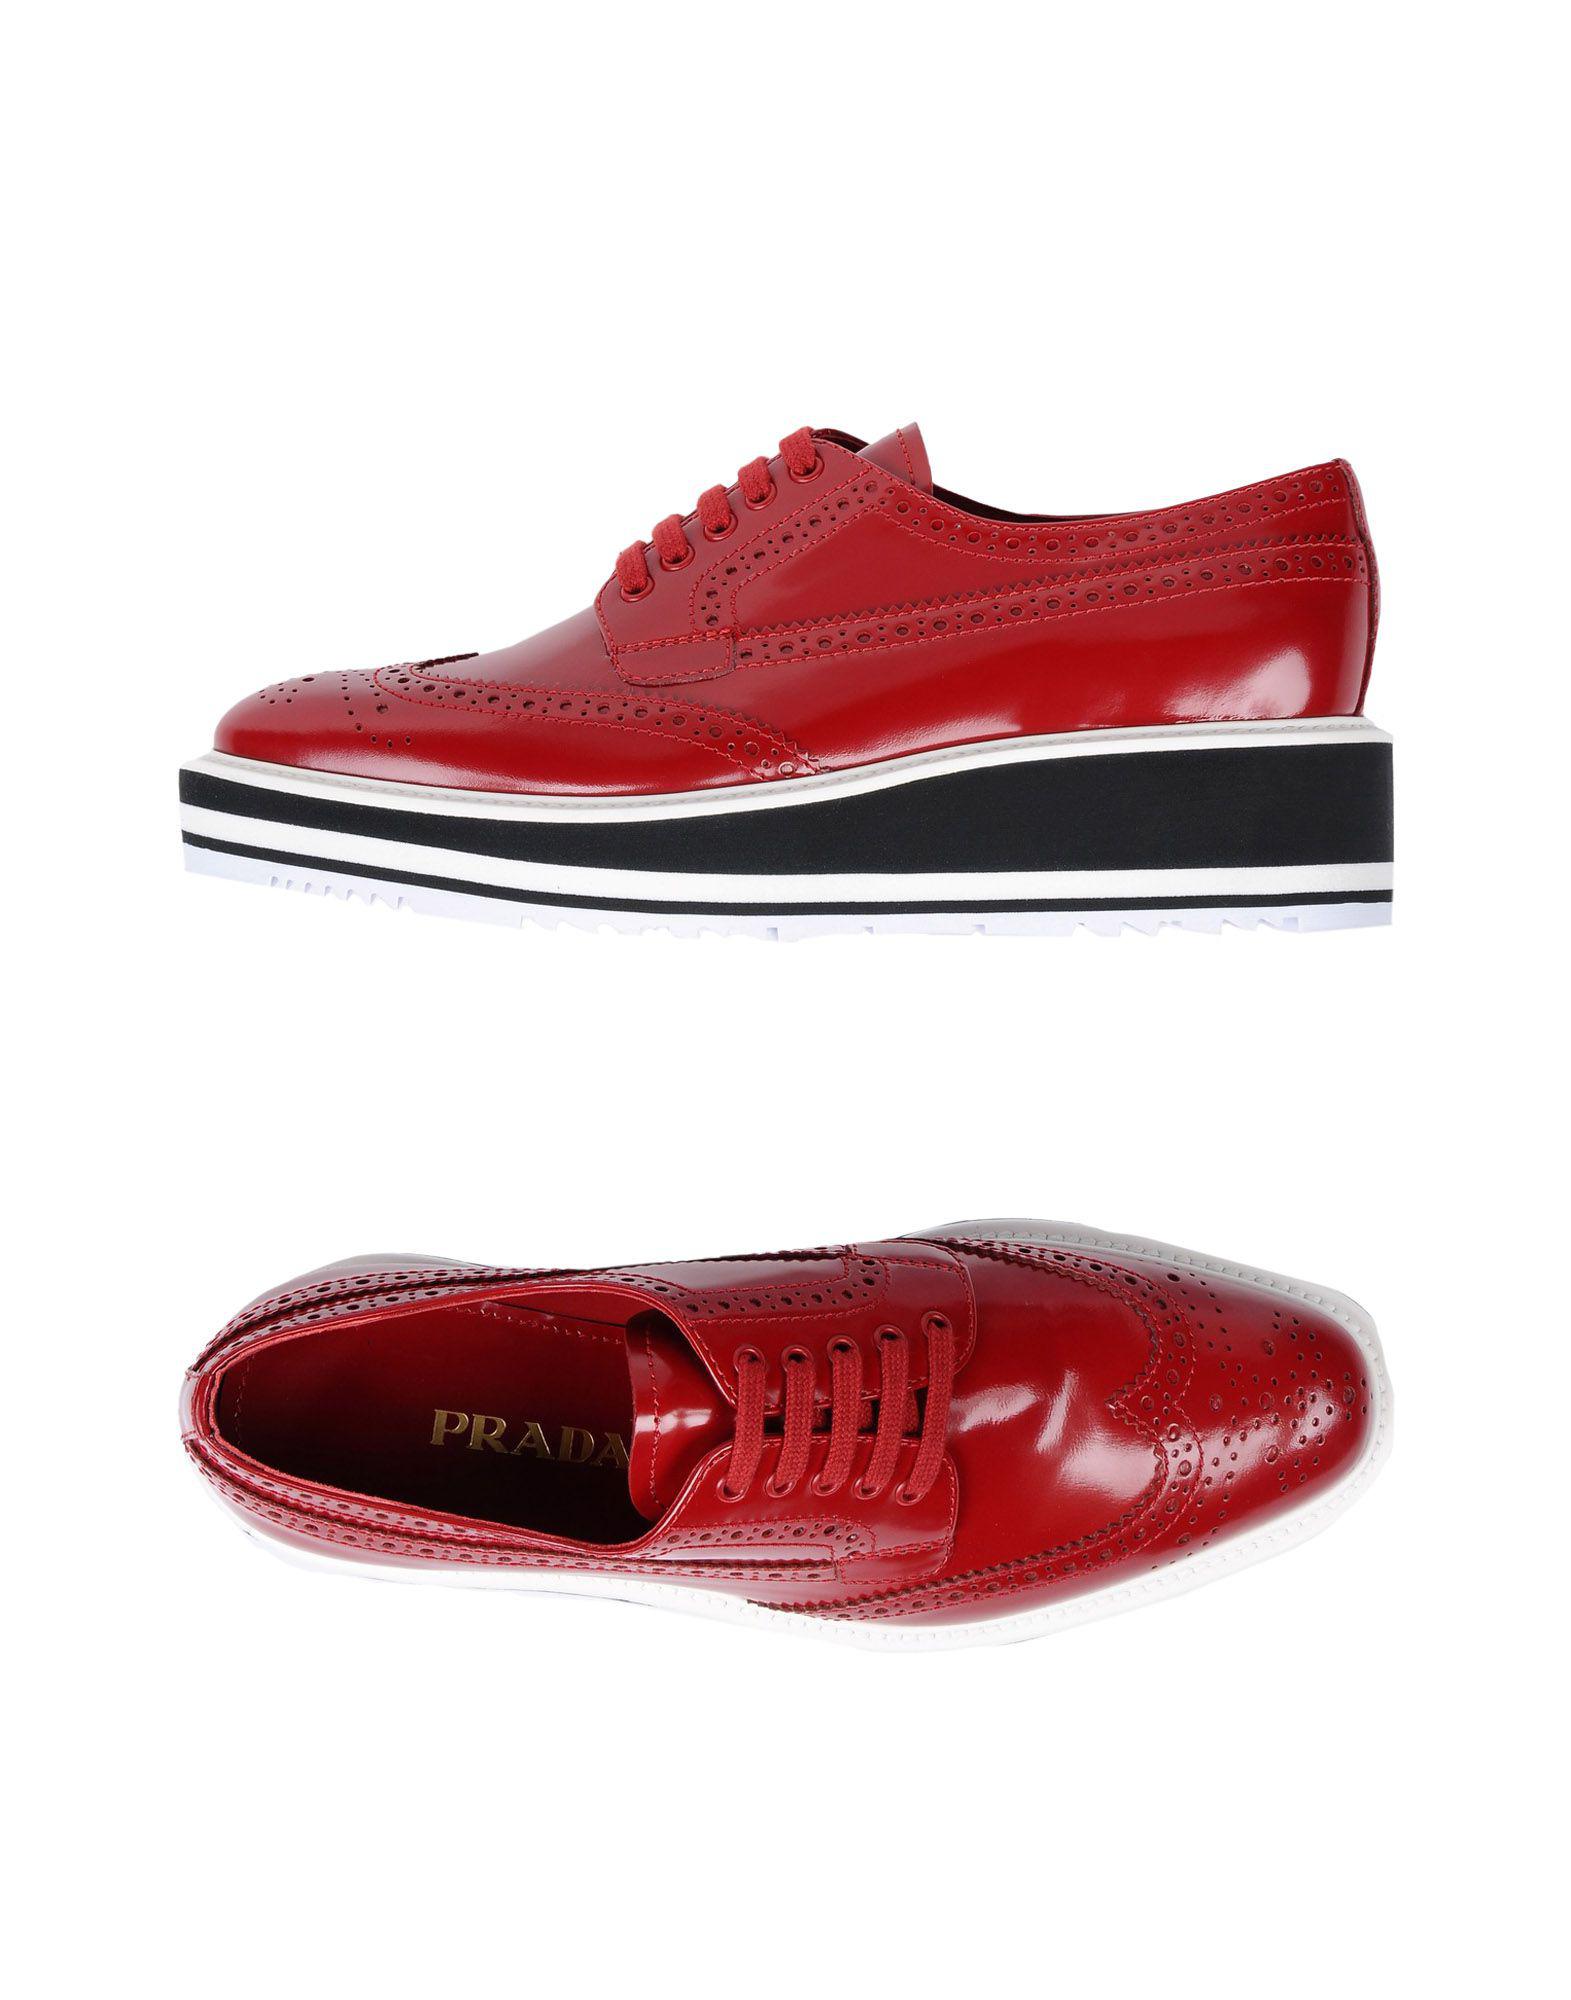 Prada Leather Lace-up Shoe in Red - Lyst